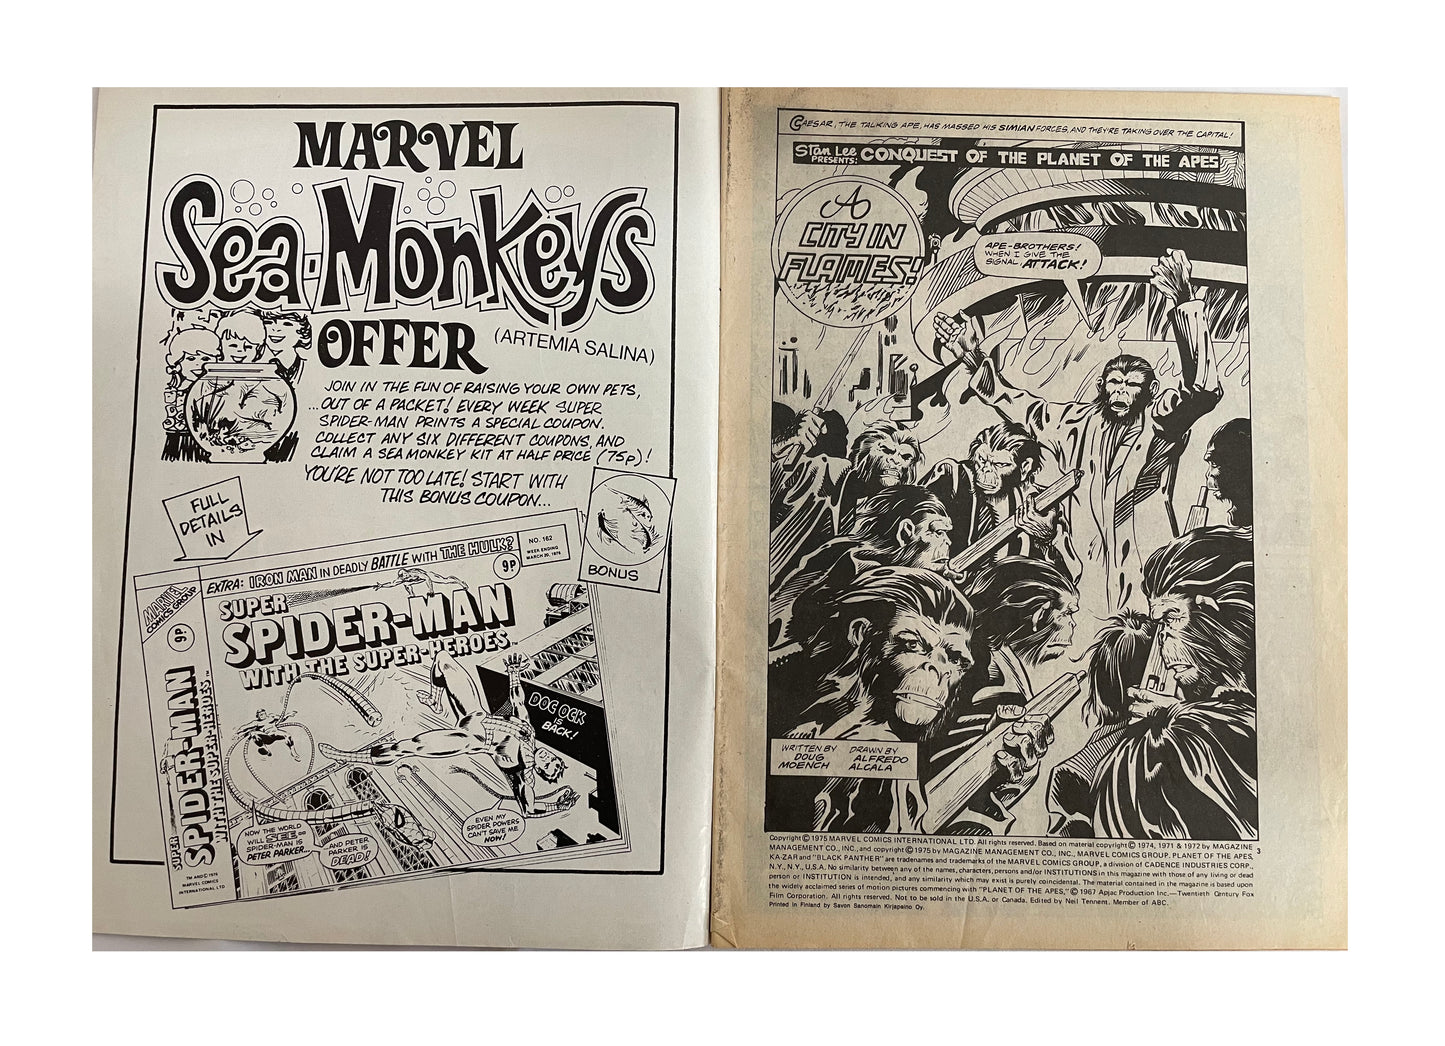 Vintage 1976 Marvels Comics - Planet Of The Apes Comic Issue No. 74 - March 20th 1976 - Former Shop Stock